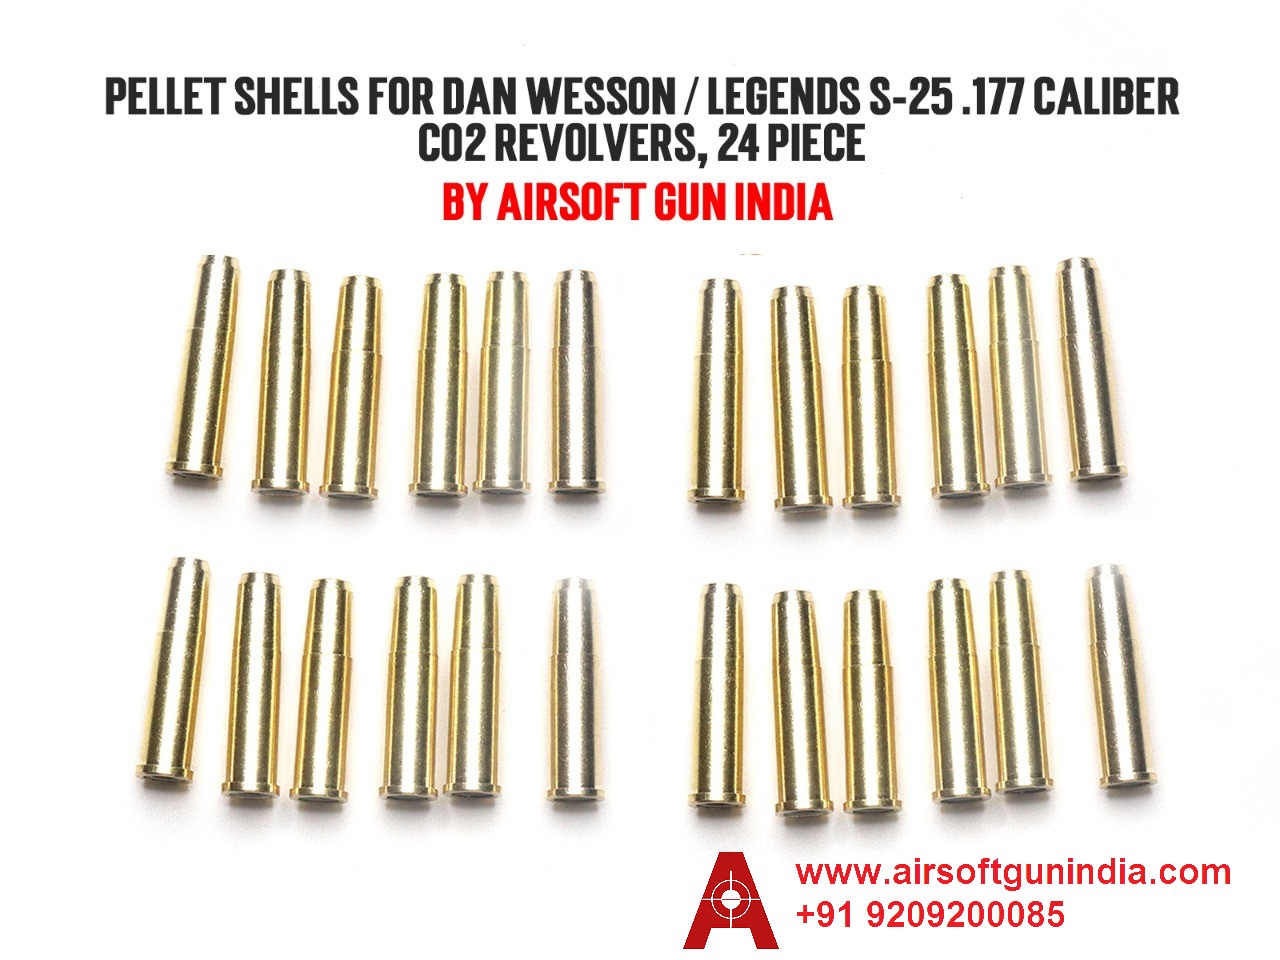 Pellet Shells For Dan Wesson .177 Caliber Co2 Revolvers, 24 Piece By Airsoft Gun India